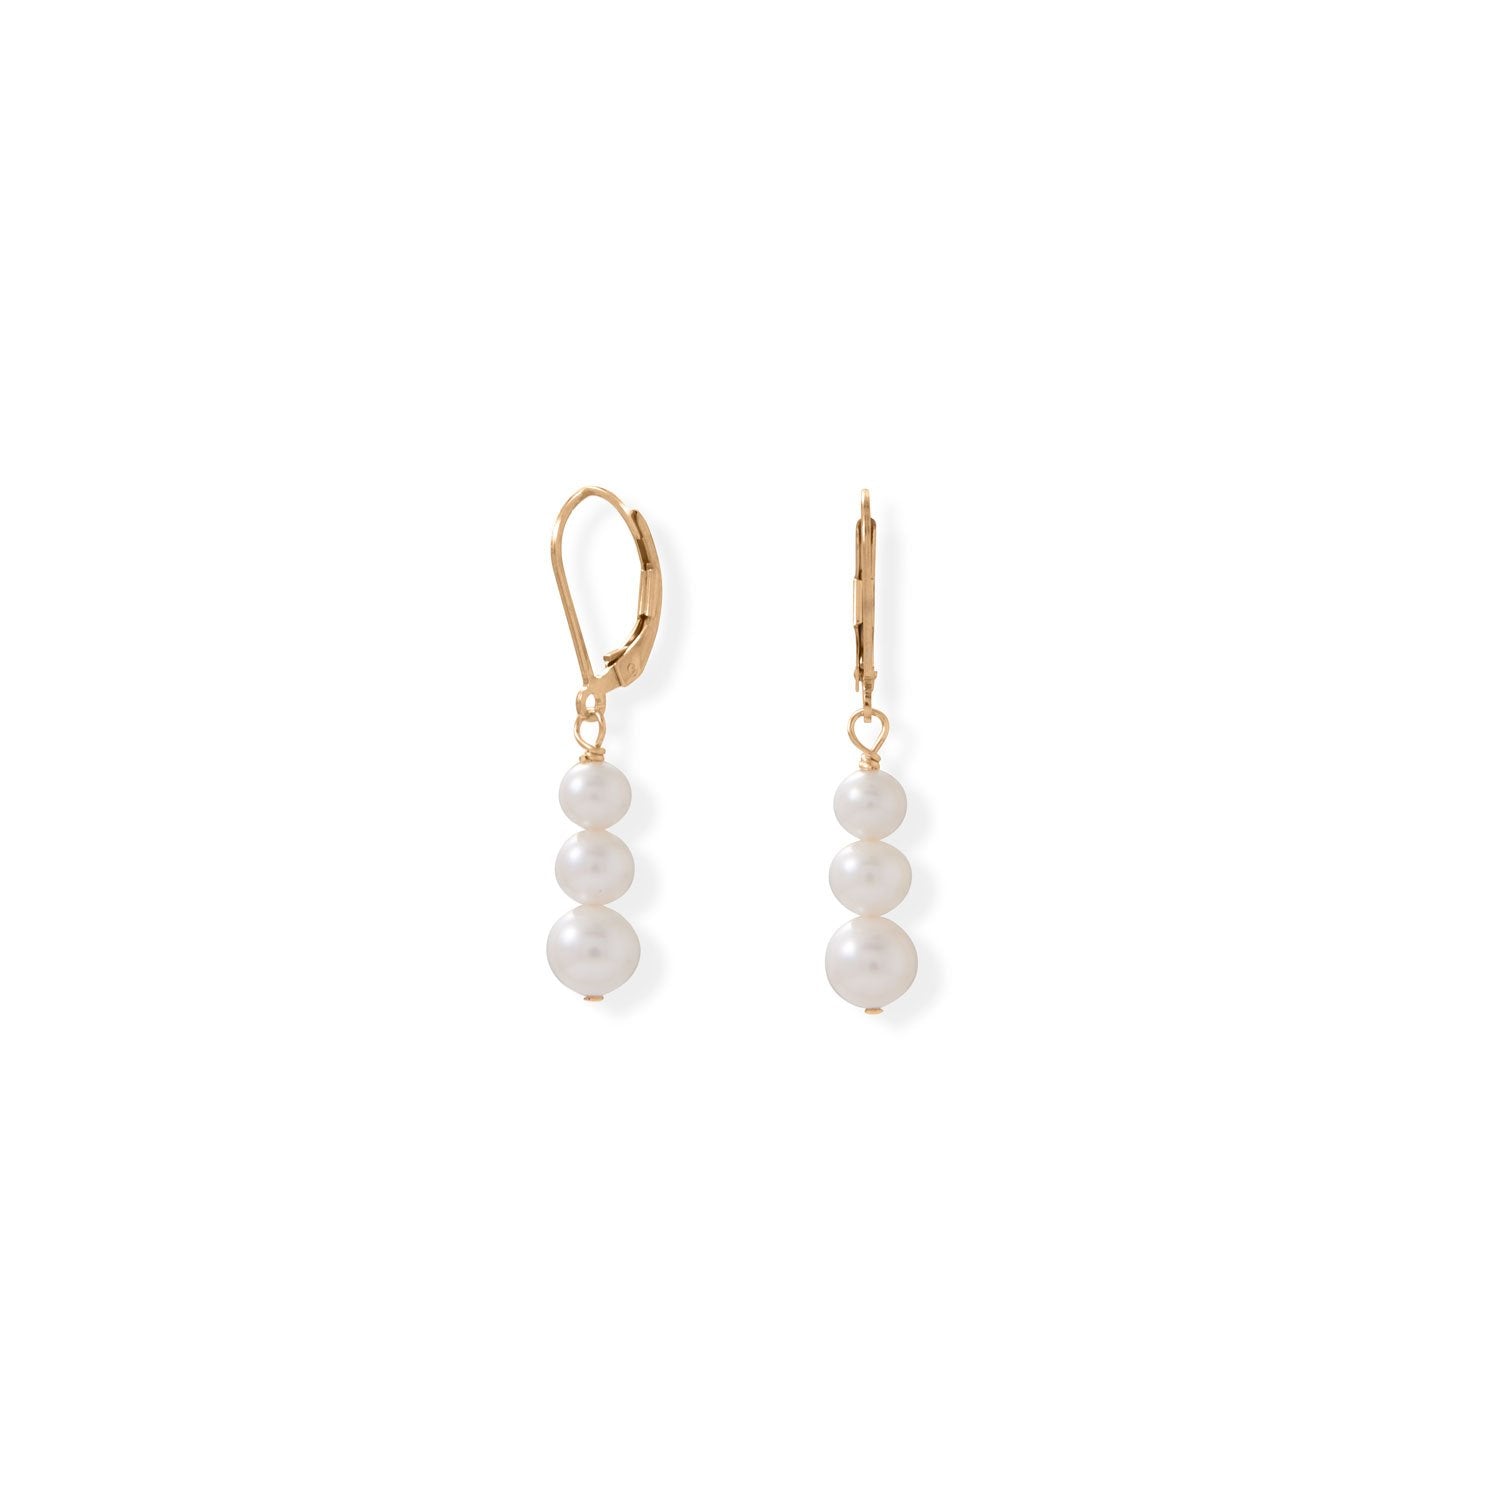 14/20 Gold Filled Stacked Cultured Freshwater Pearl Lever Earrings - Joyeria Lady